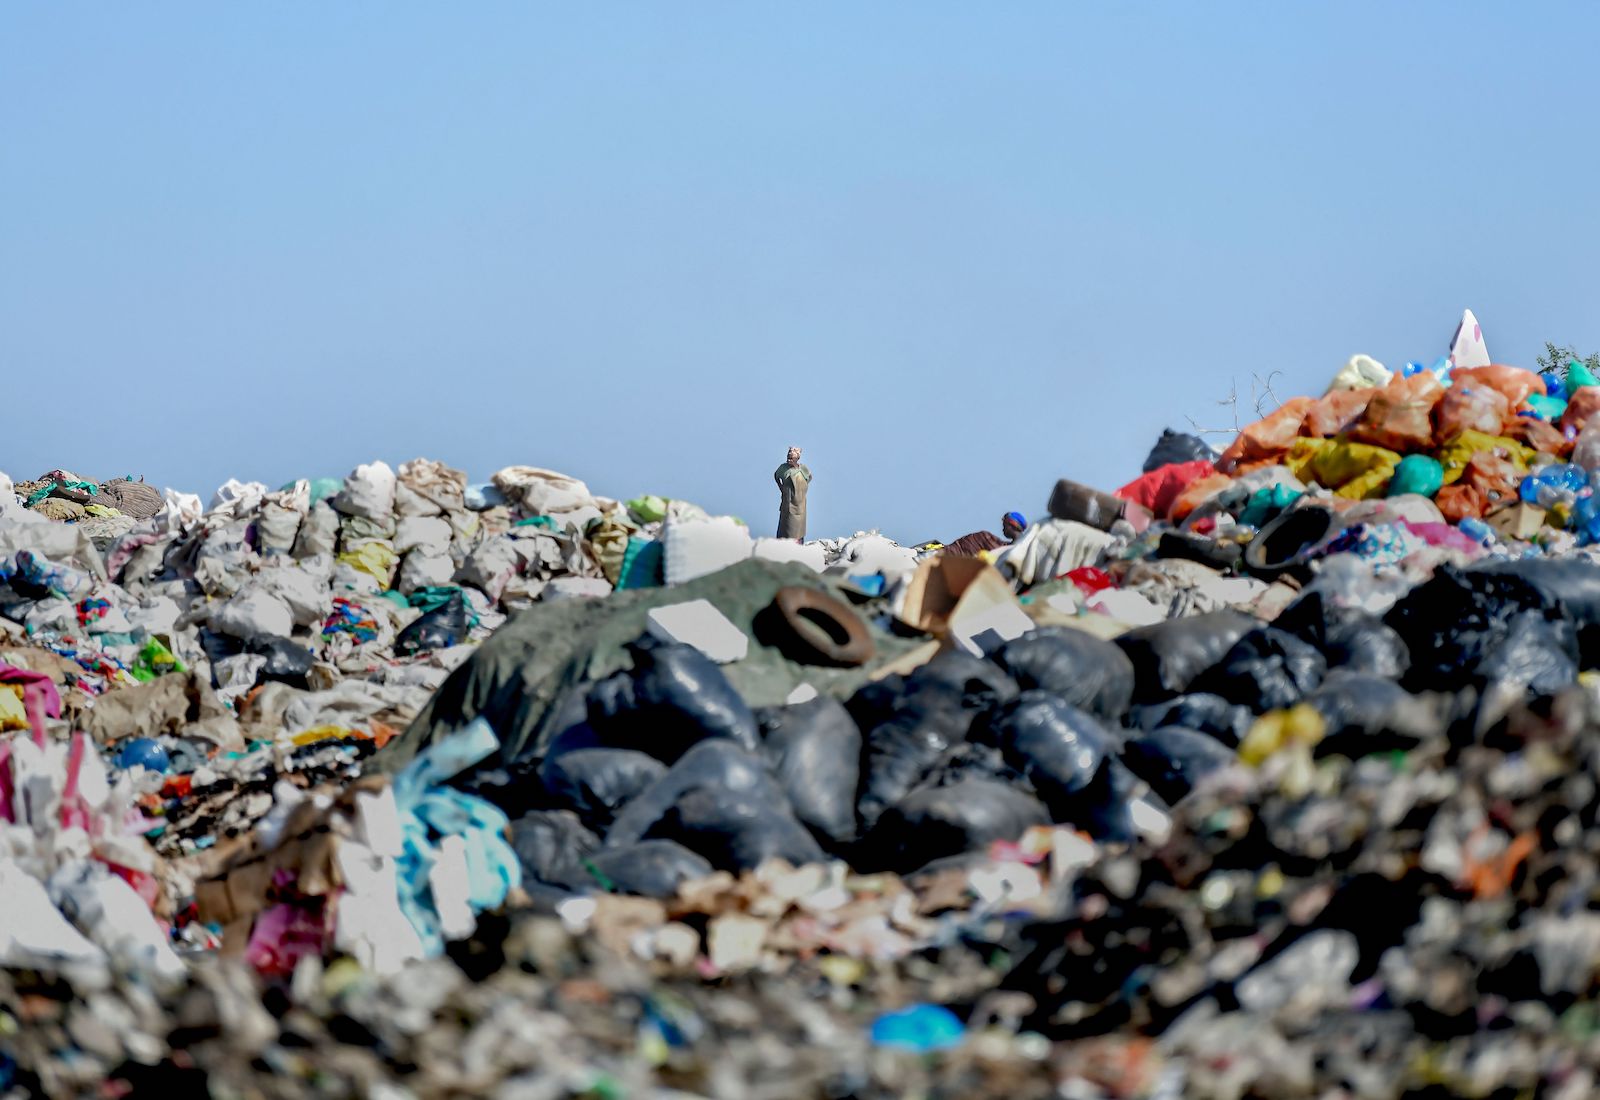 A waste picker stands in the distant background on top of a pile of trash